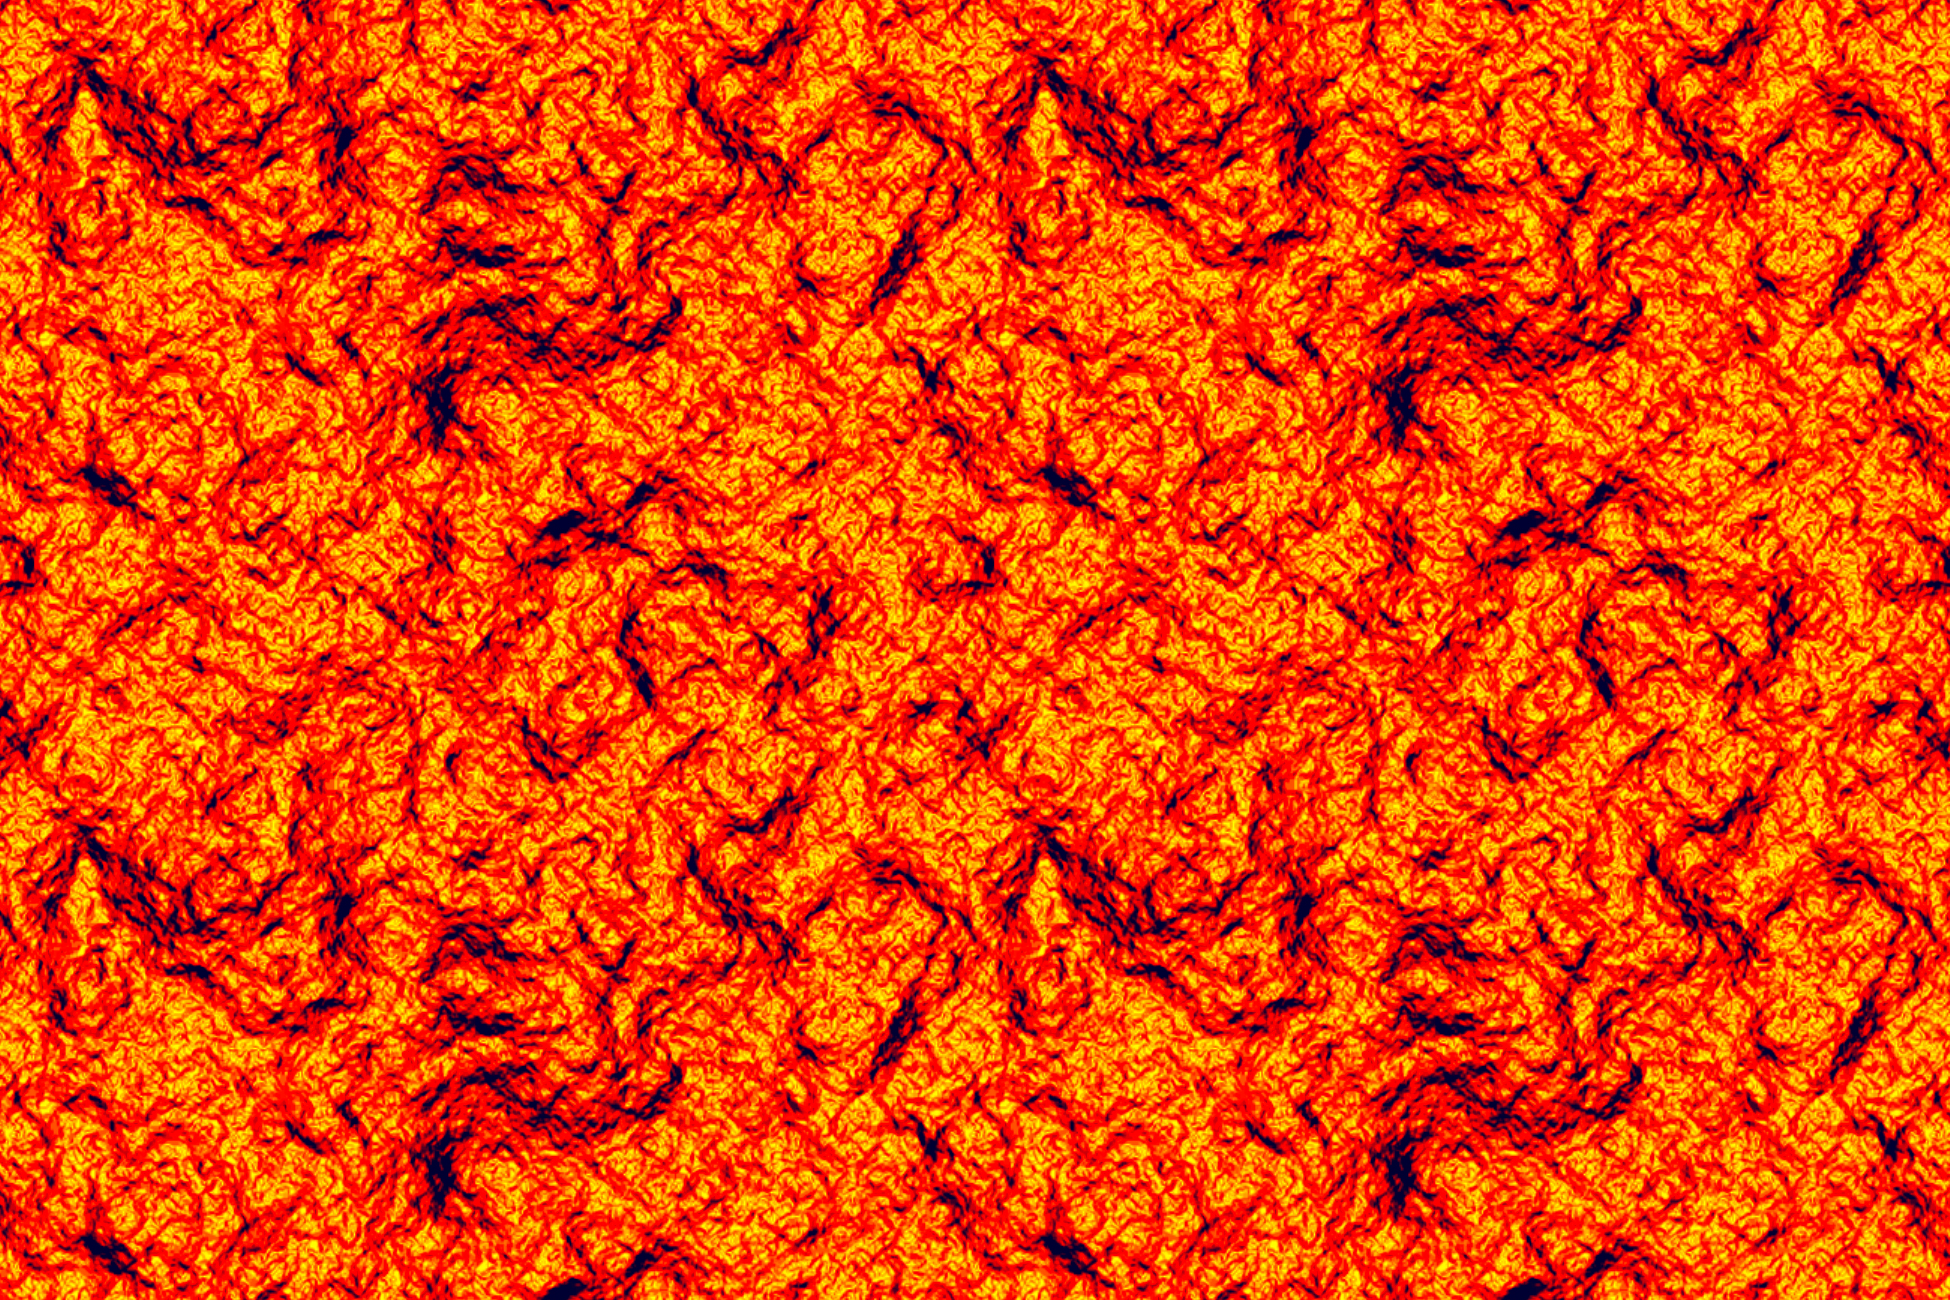 Lava pattern from Photoshop's Clouds filter